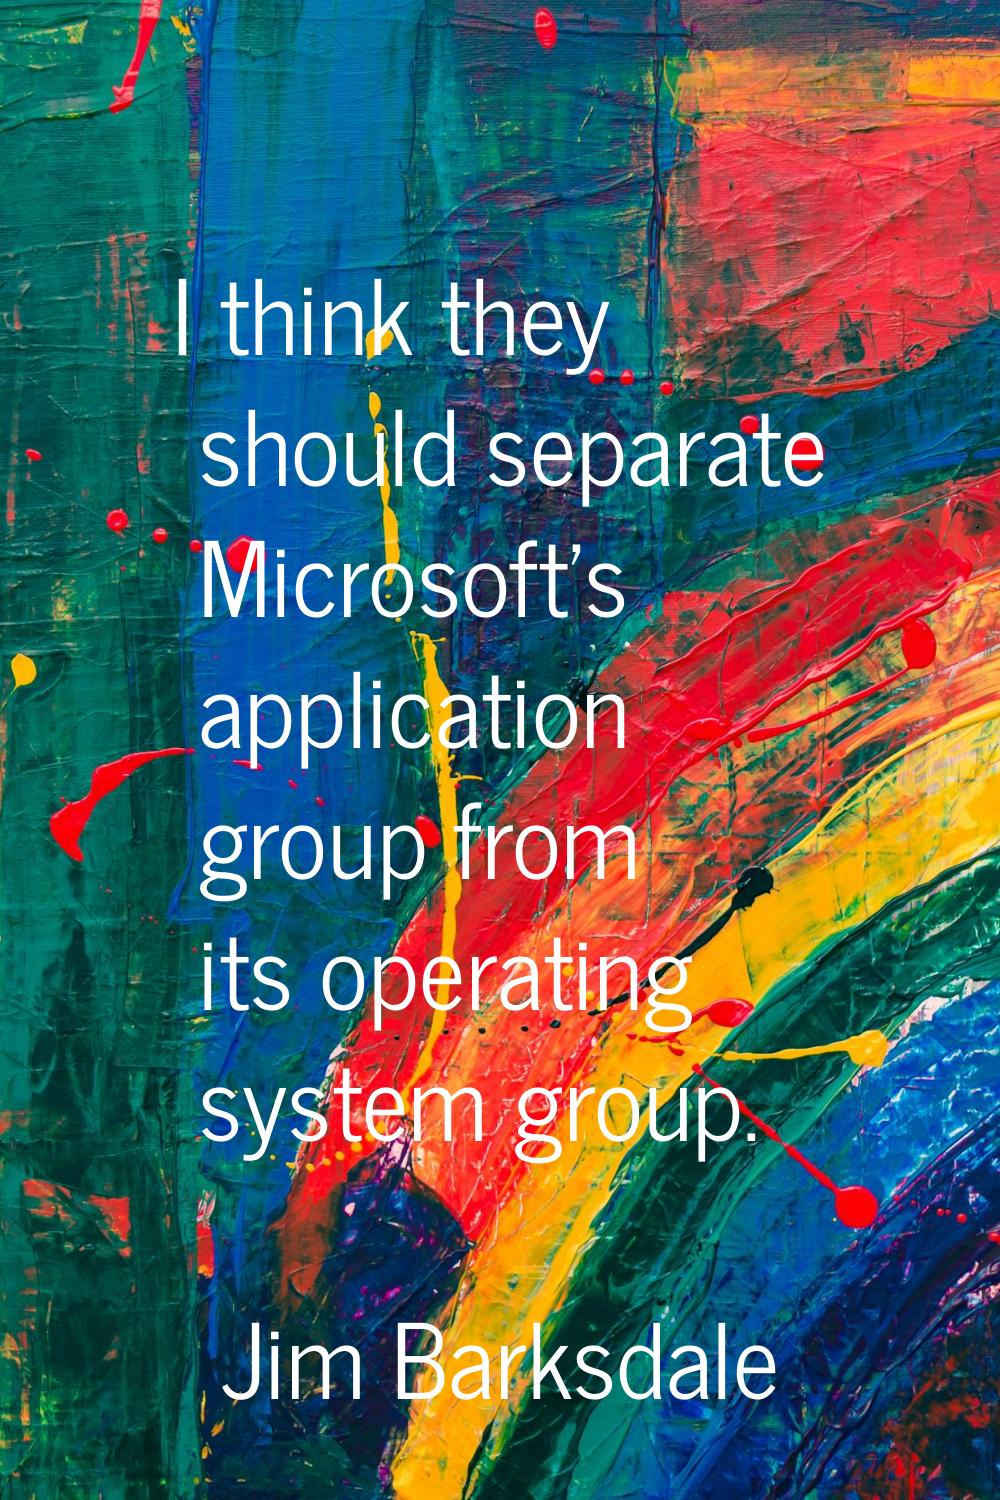 I think they should separate Microsoft's application group from its operating system group.